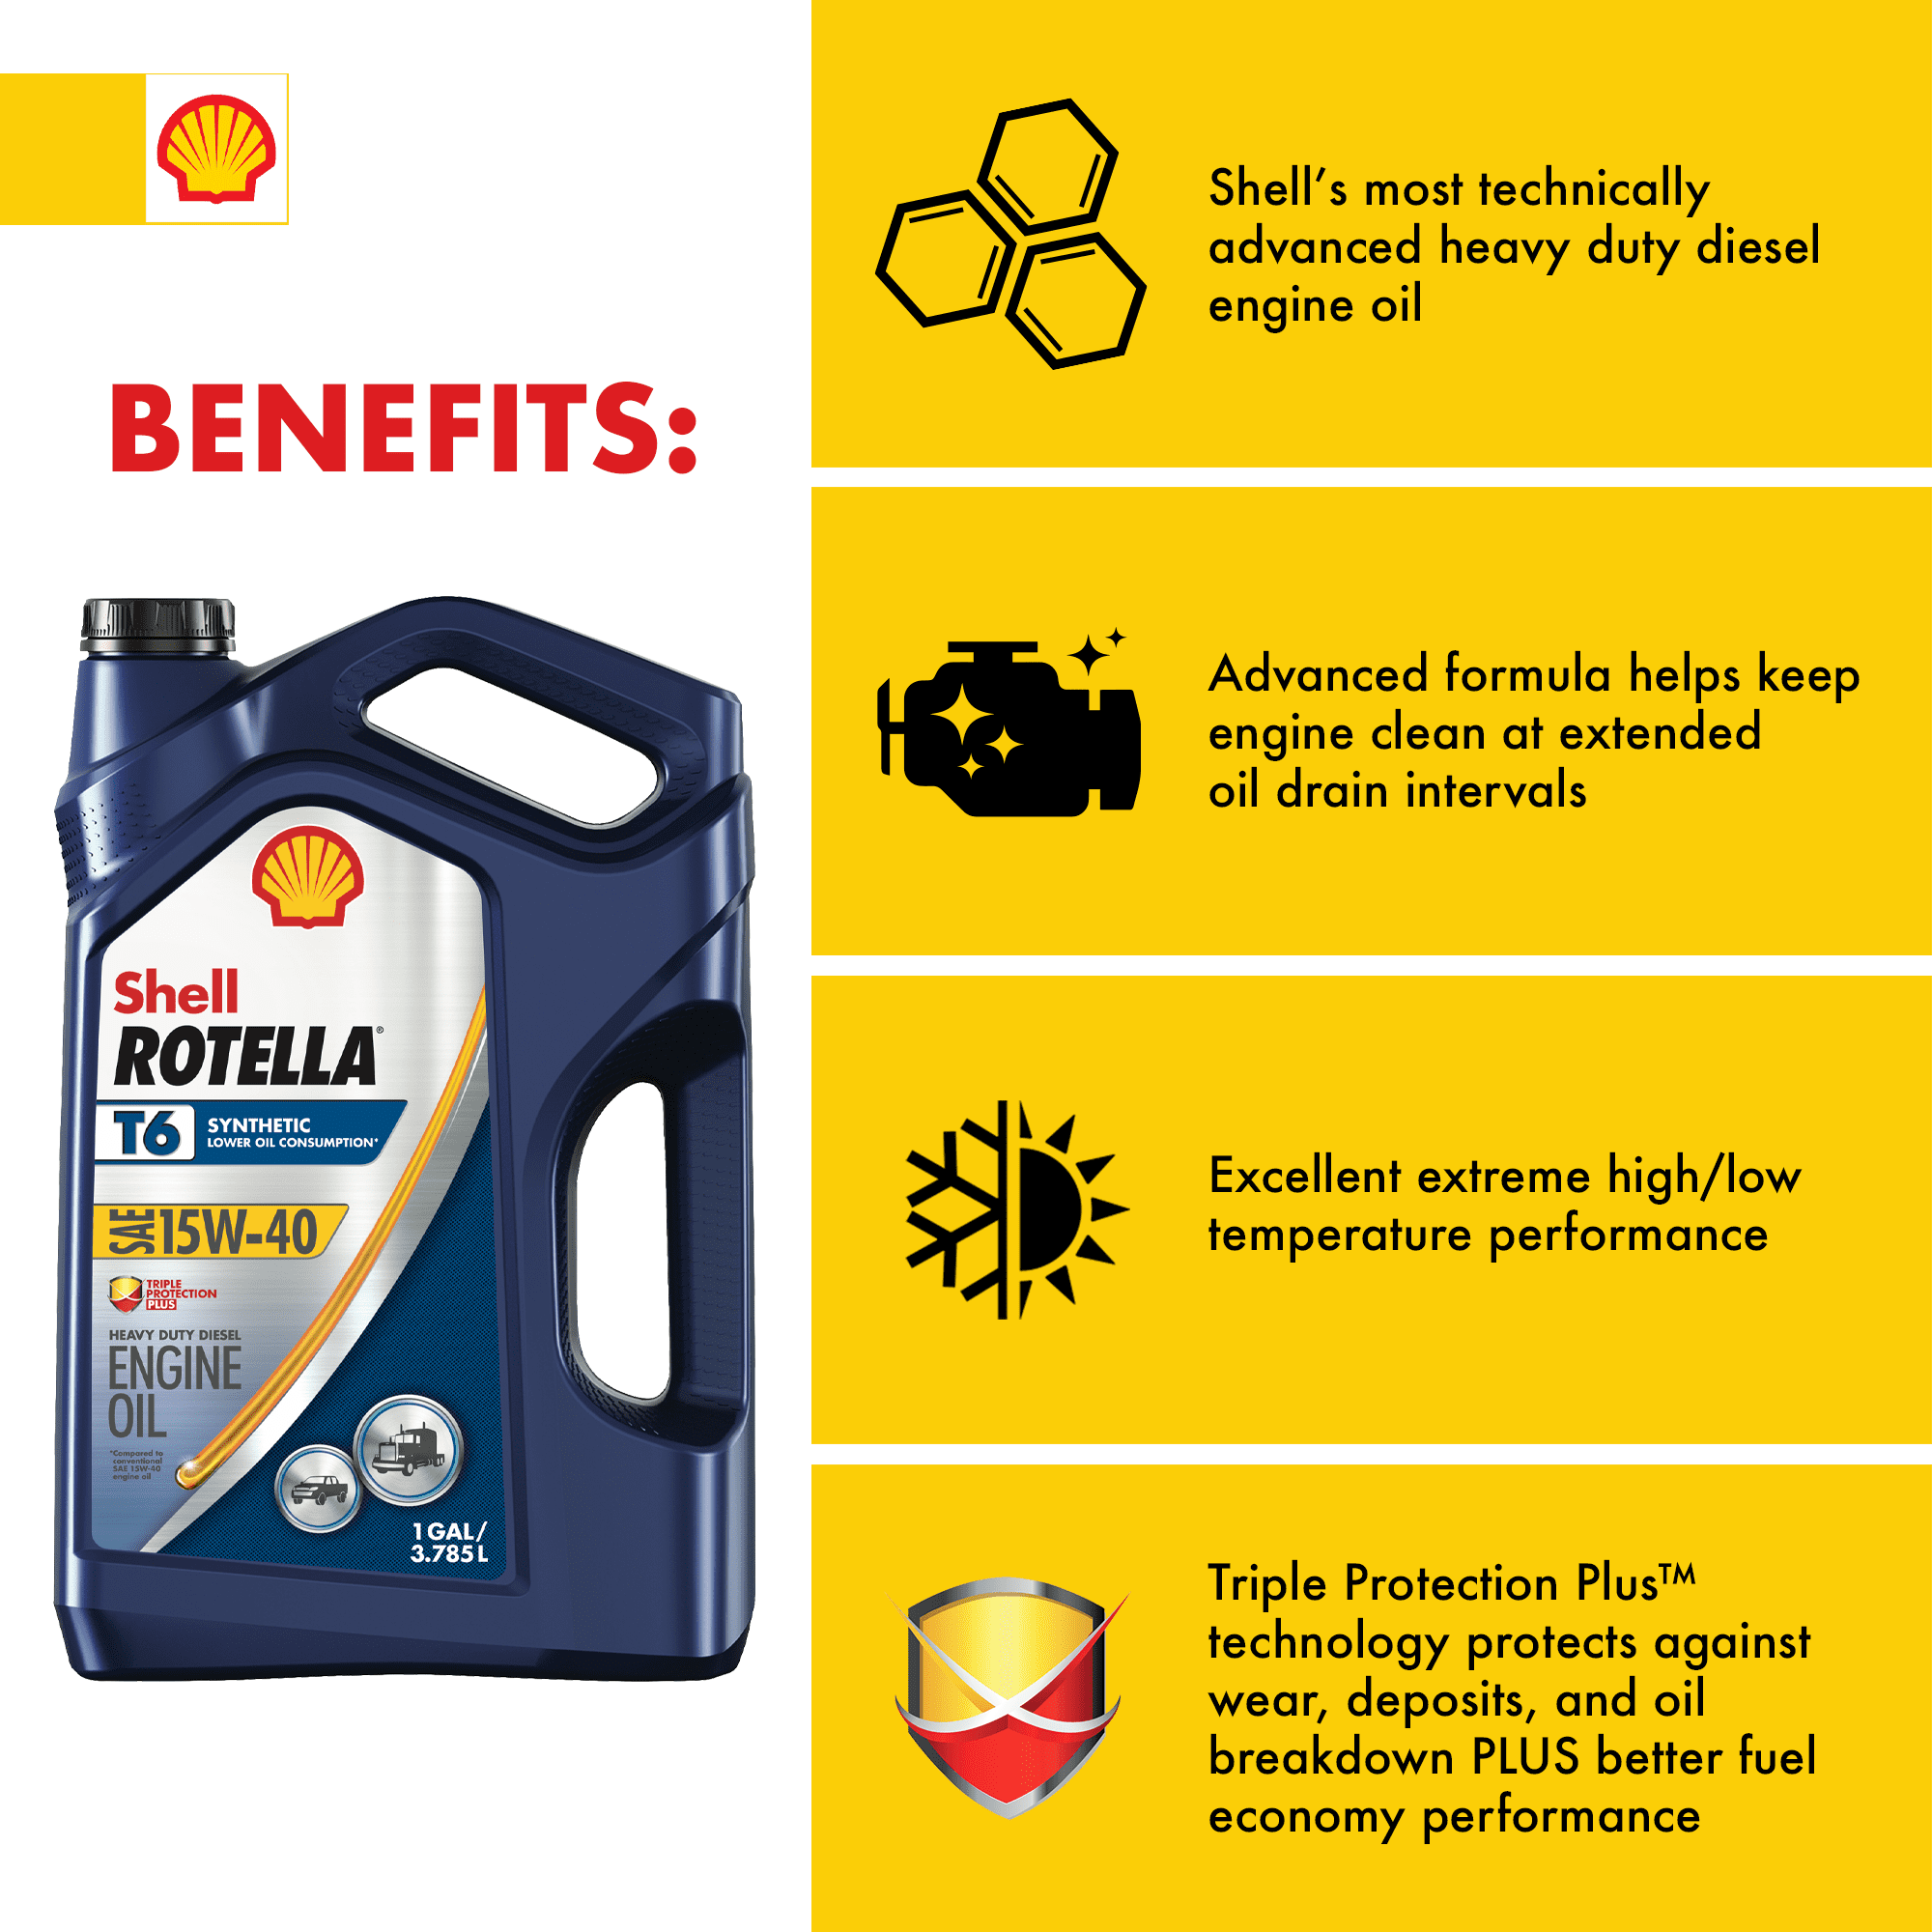 Shell Rotella T6 Full Synthetic 15W-40 Diesel Engine Oil, 1 Gallon - 1